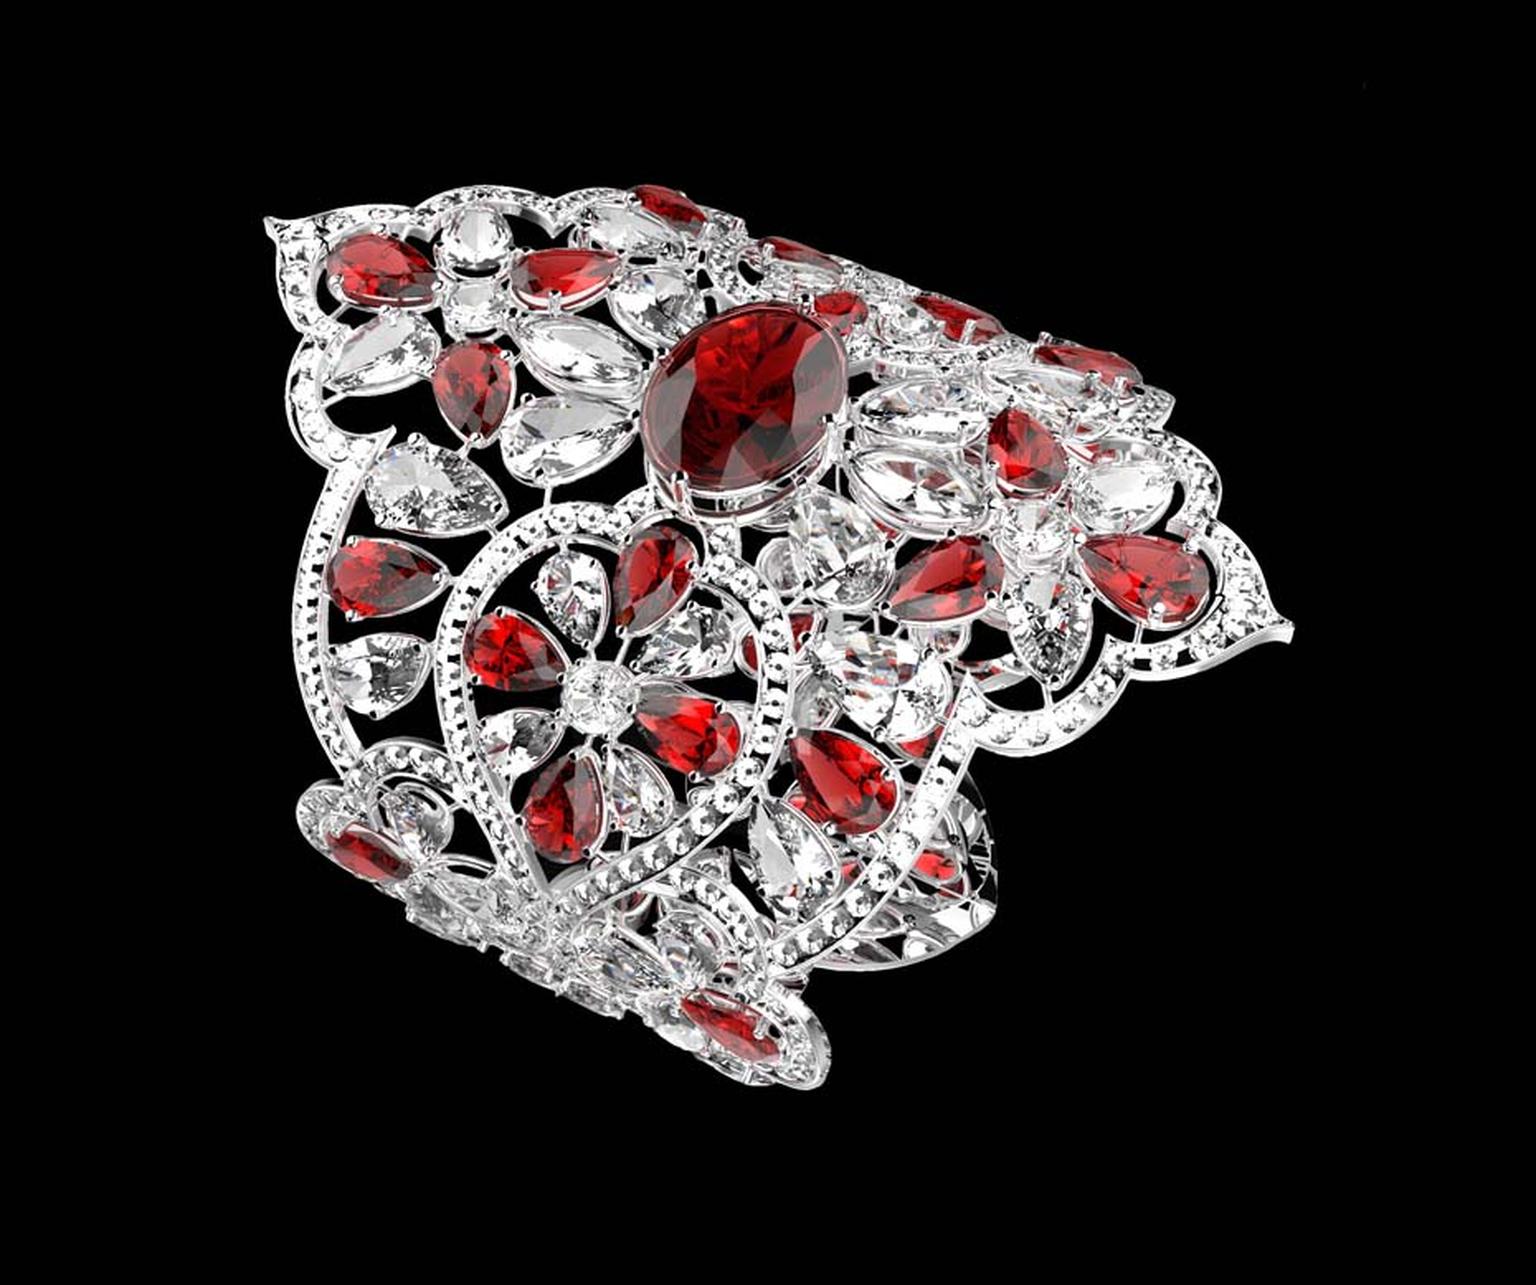 Orlov jewellery: €4 million ruby and diamond bracelet is the star of Monte Carlo showcase this summer